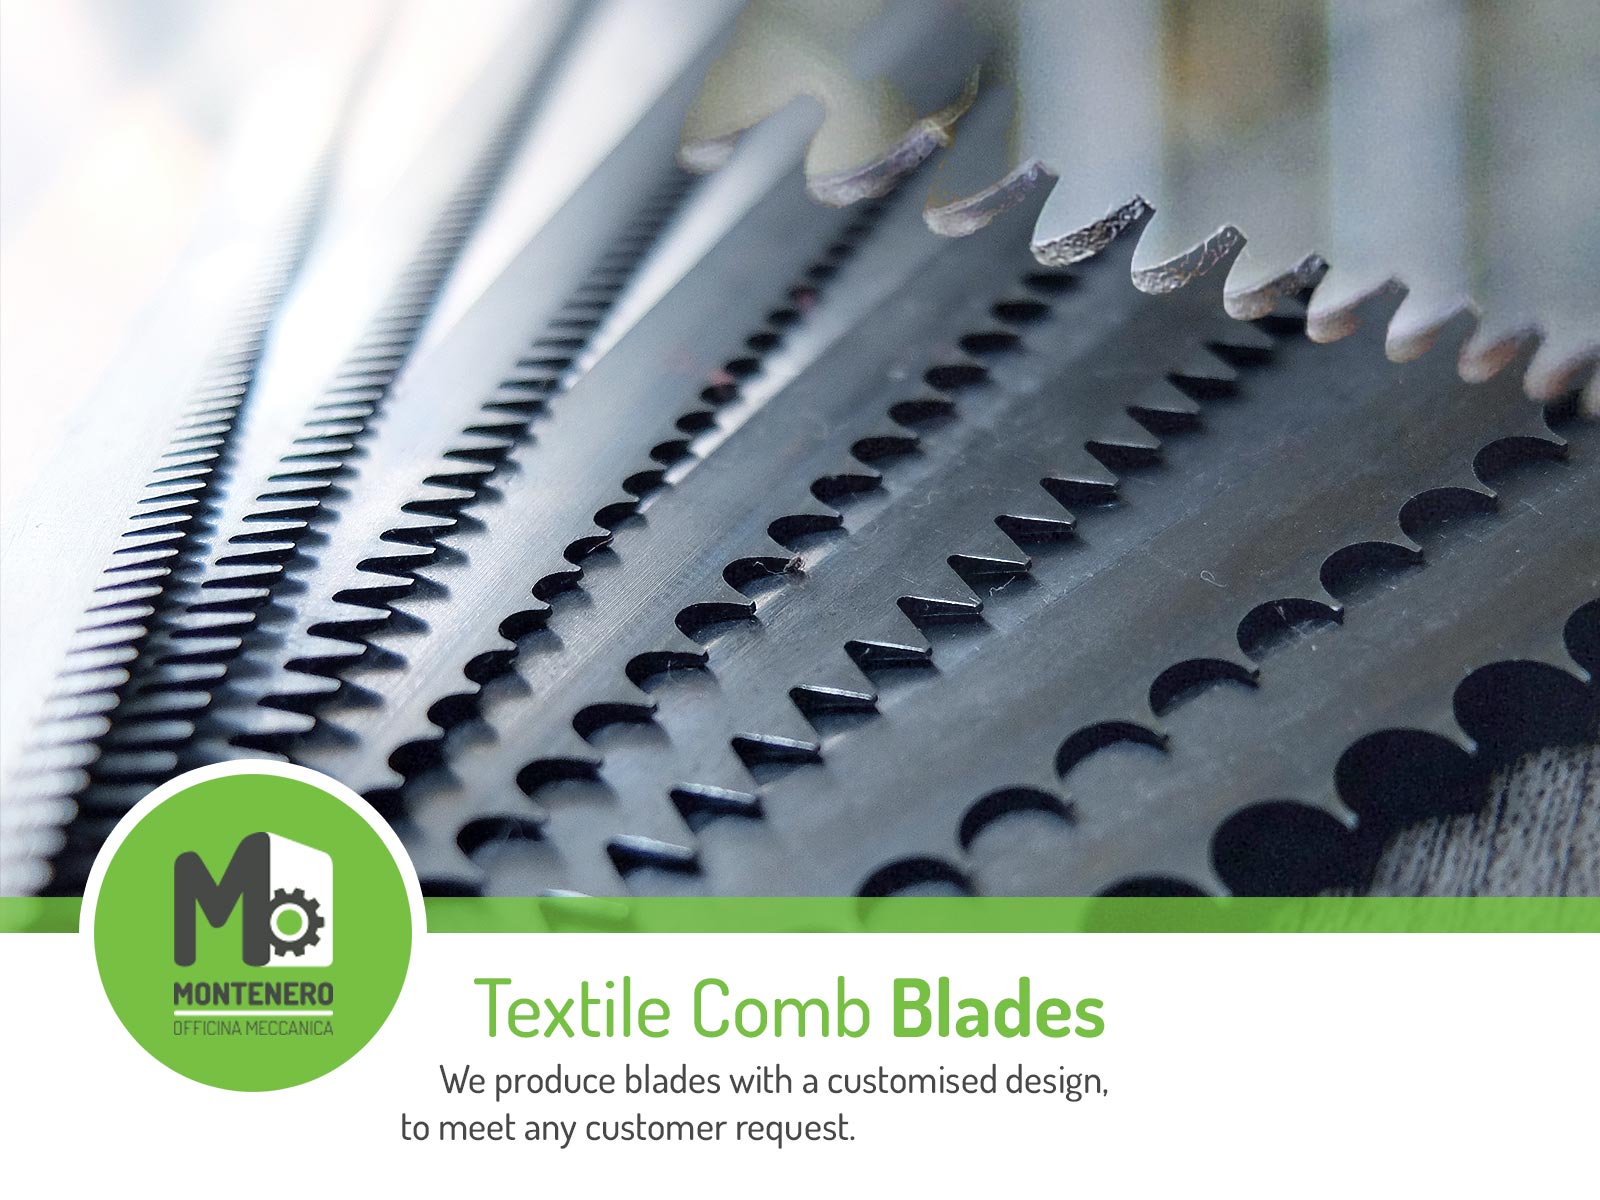 We produce blades with a customised design, to meet any customer request.